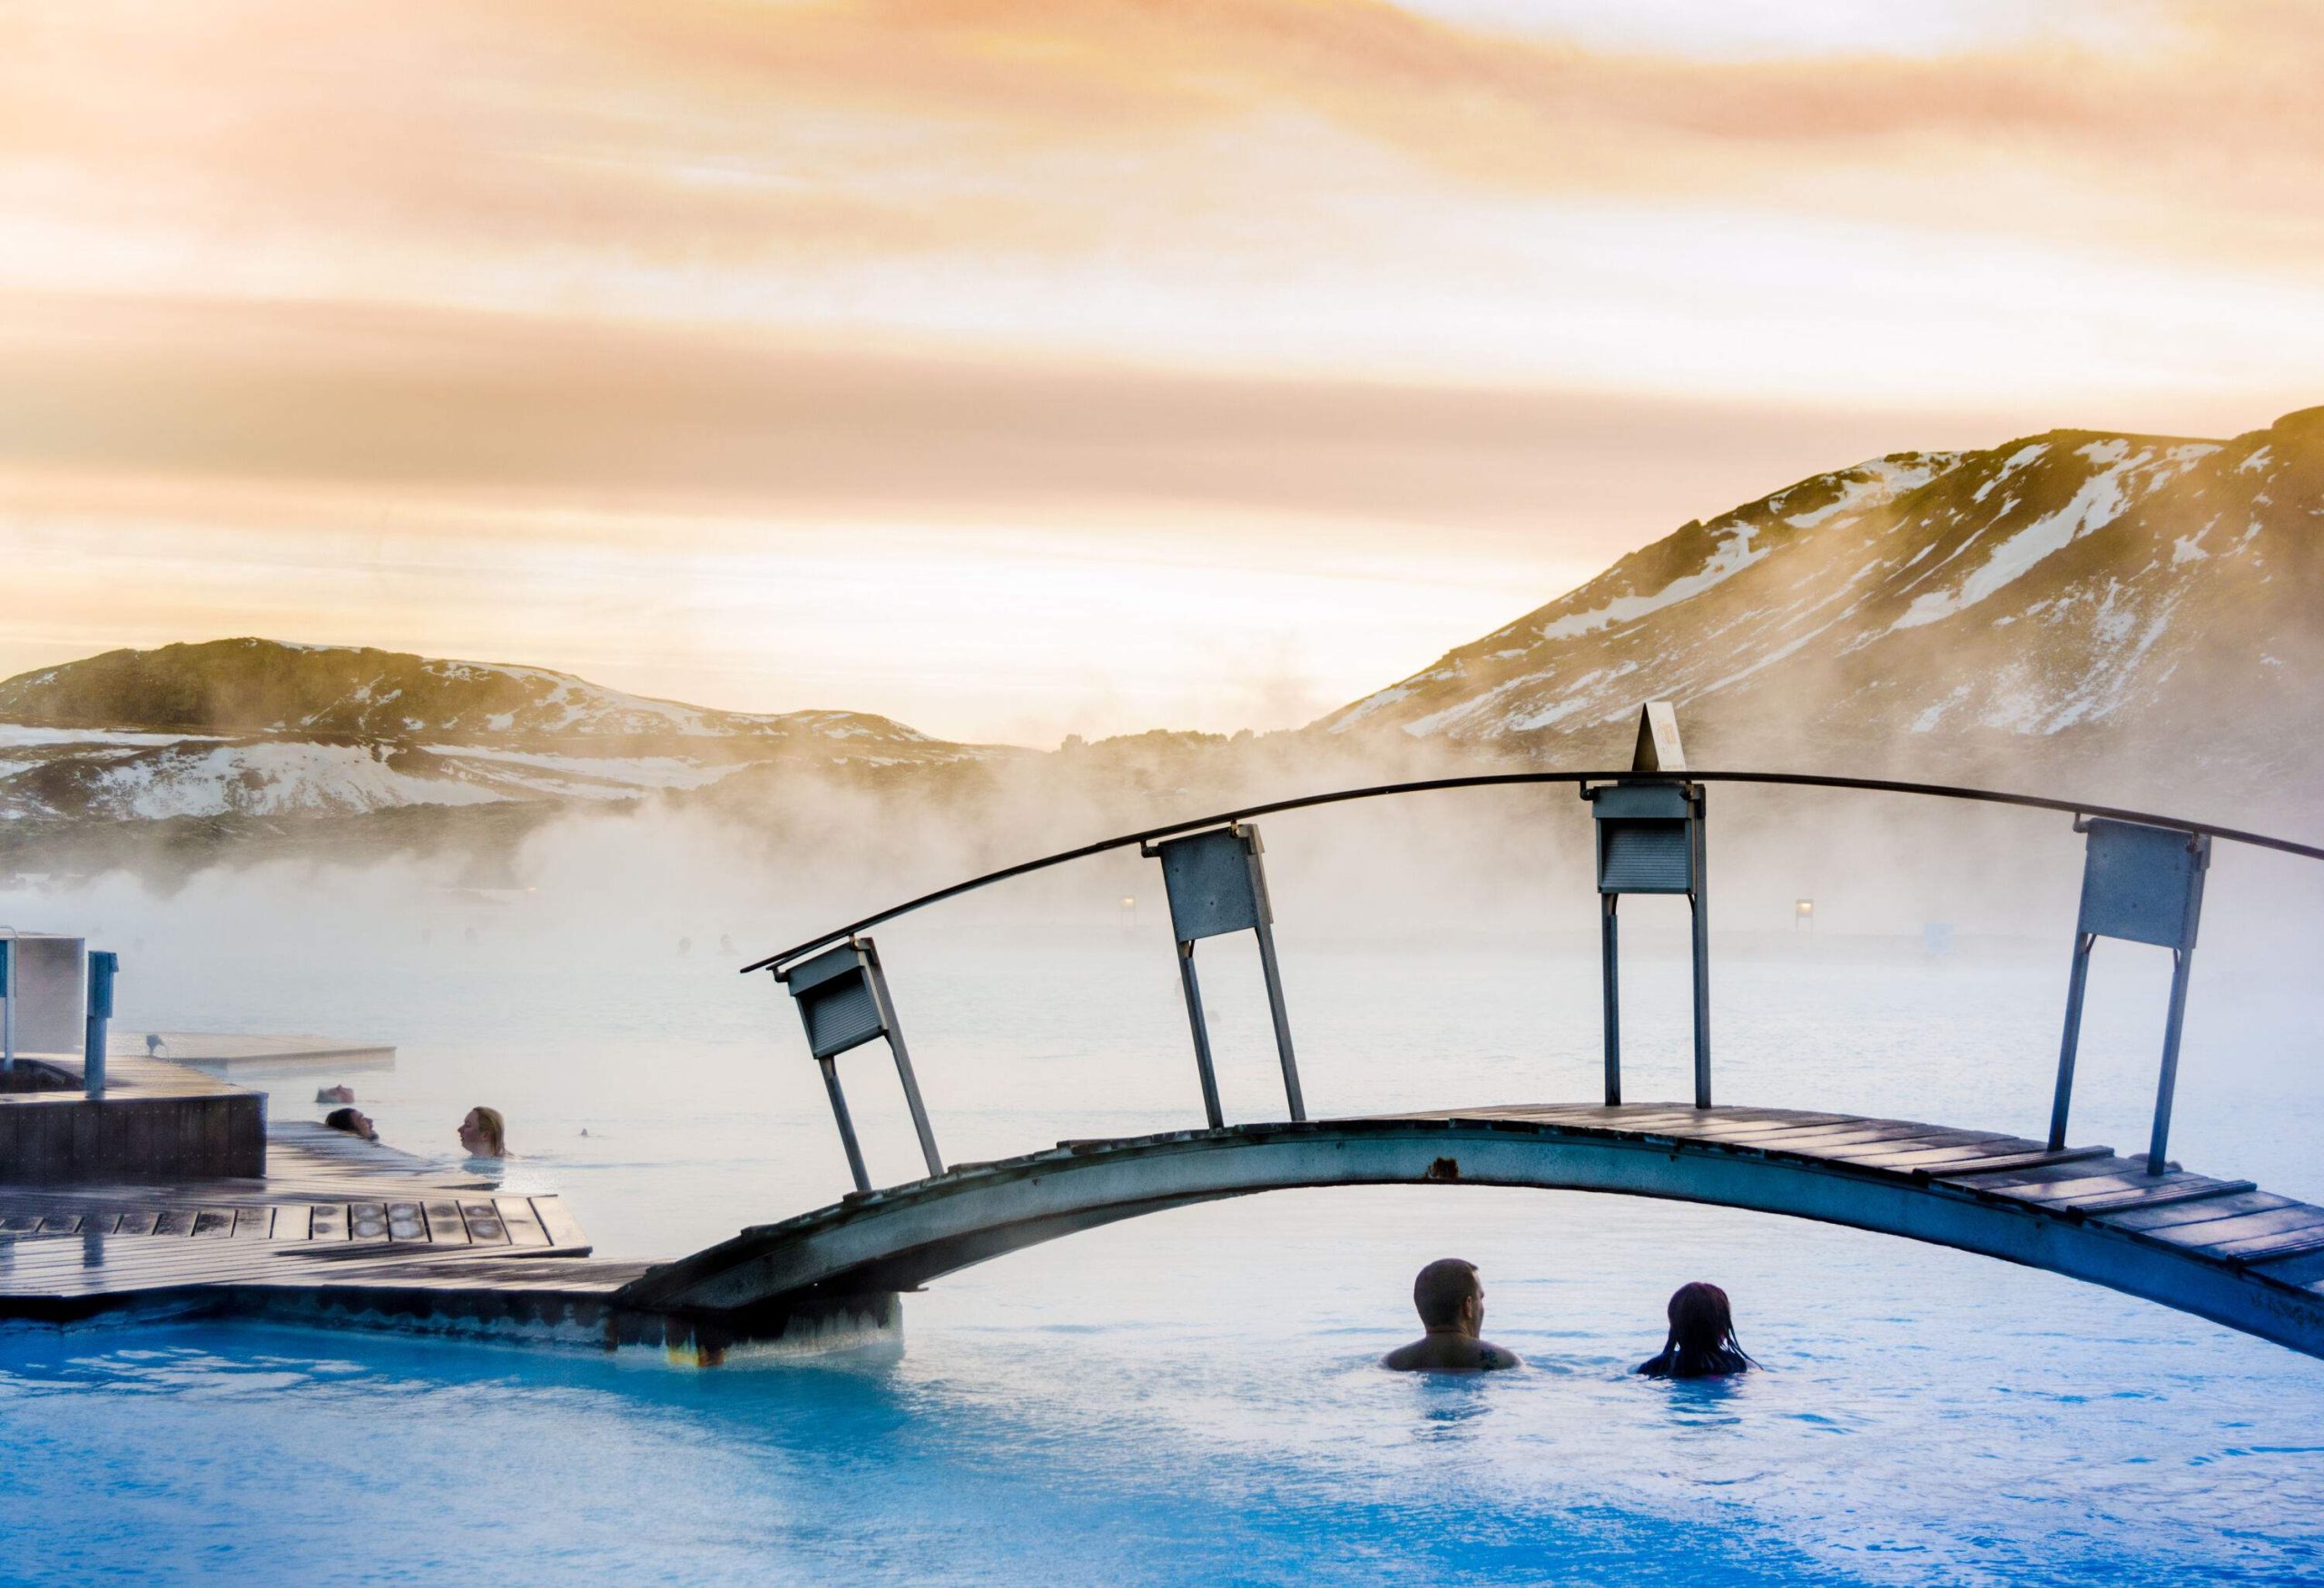 A pair of couples enjoying the blue thermal lagoon with an arch bridge surrounded by steam.